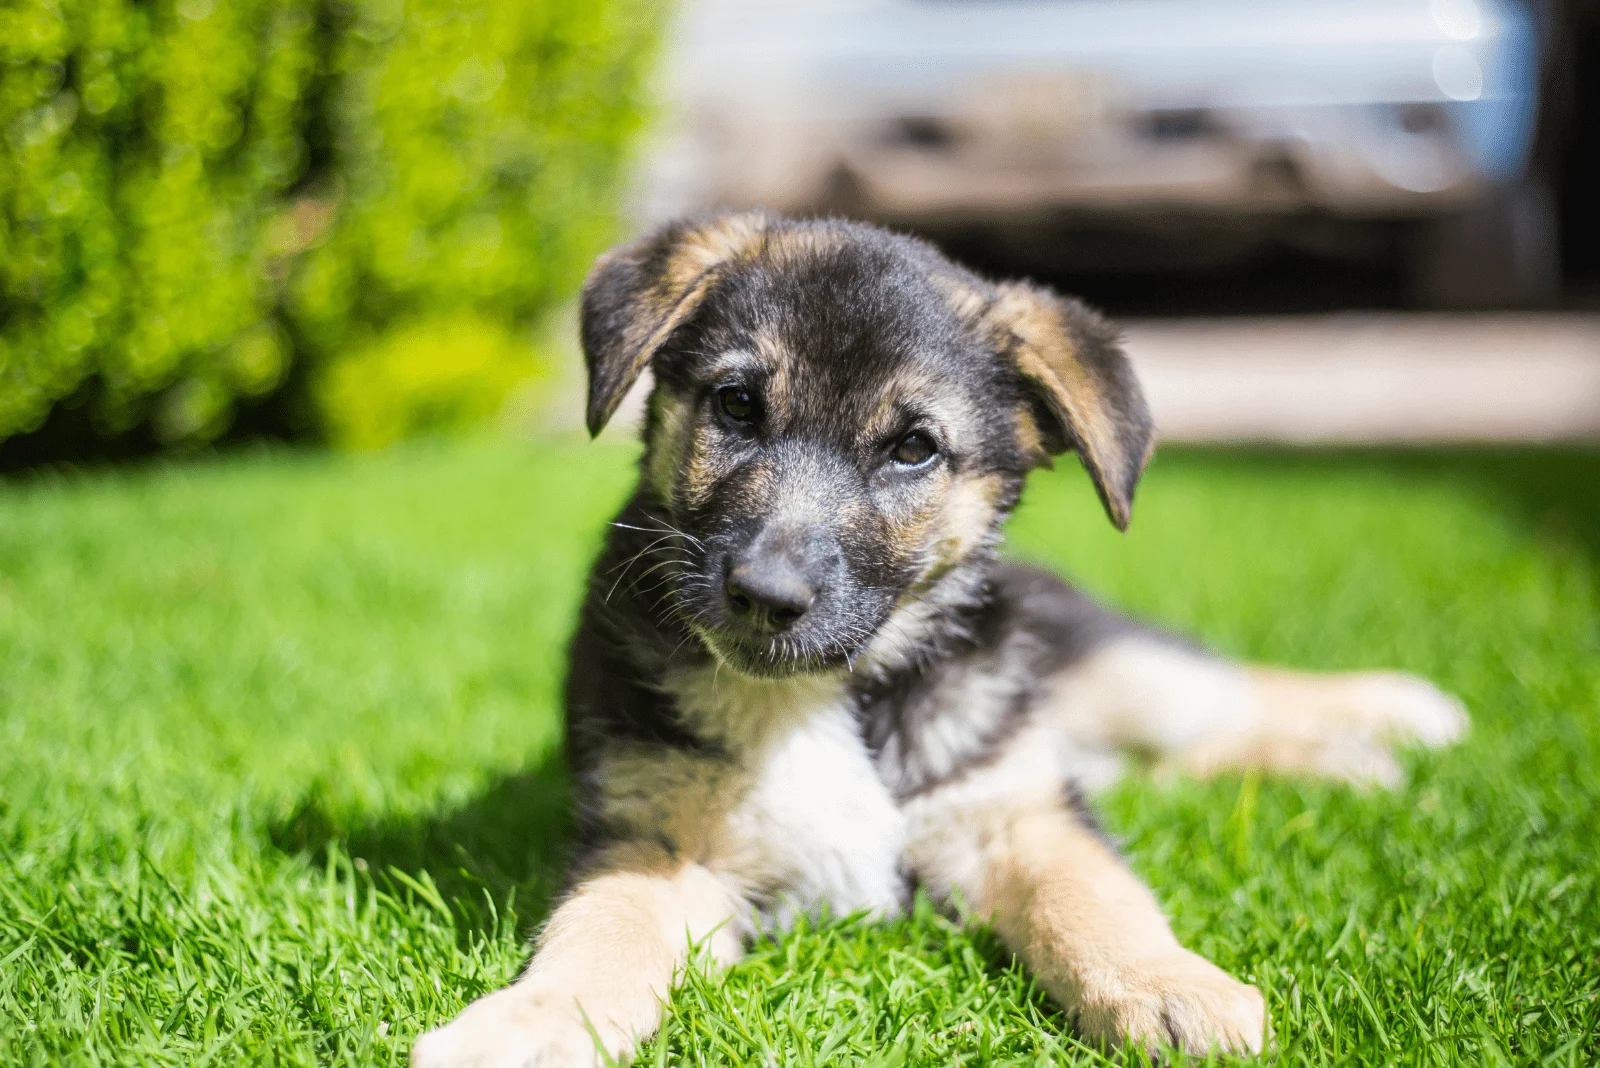 German Shepherd Puppy is lying on the grass and enjoying the sun